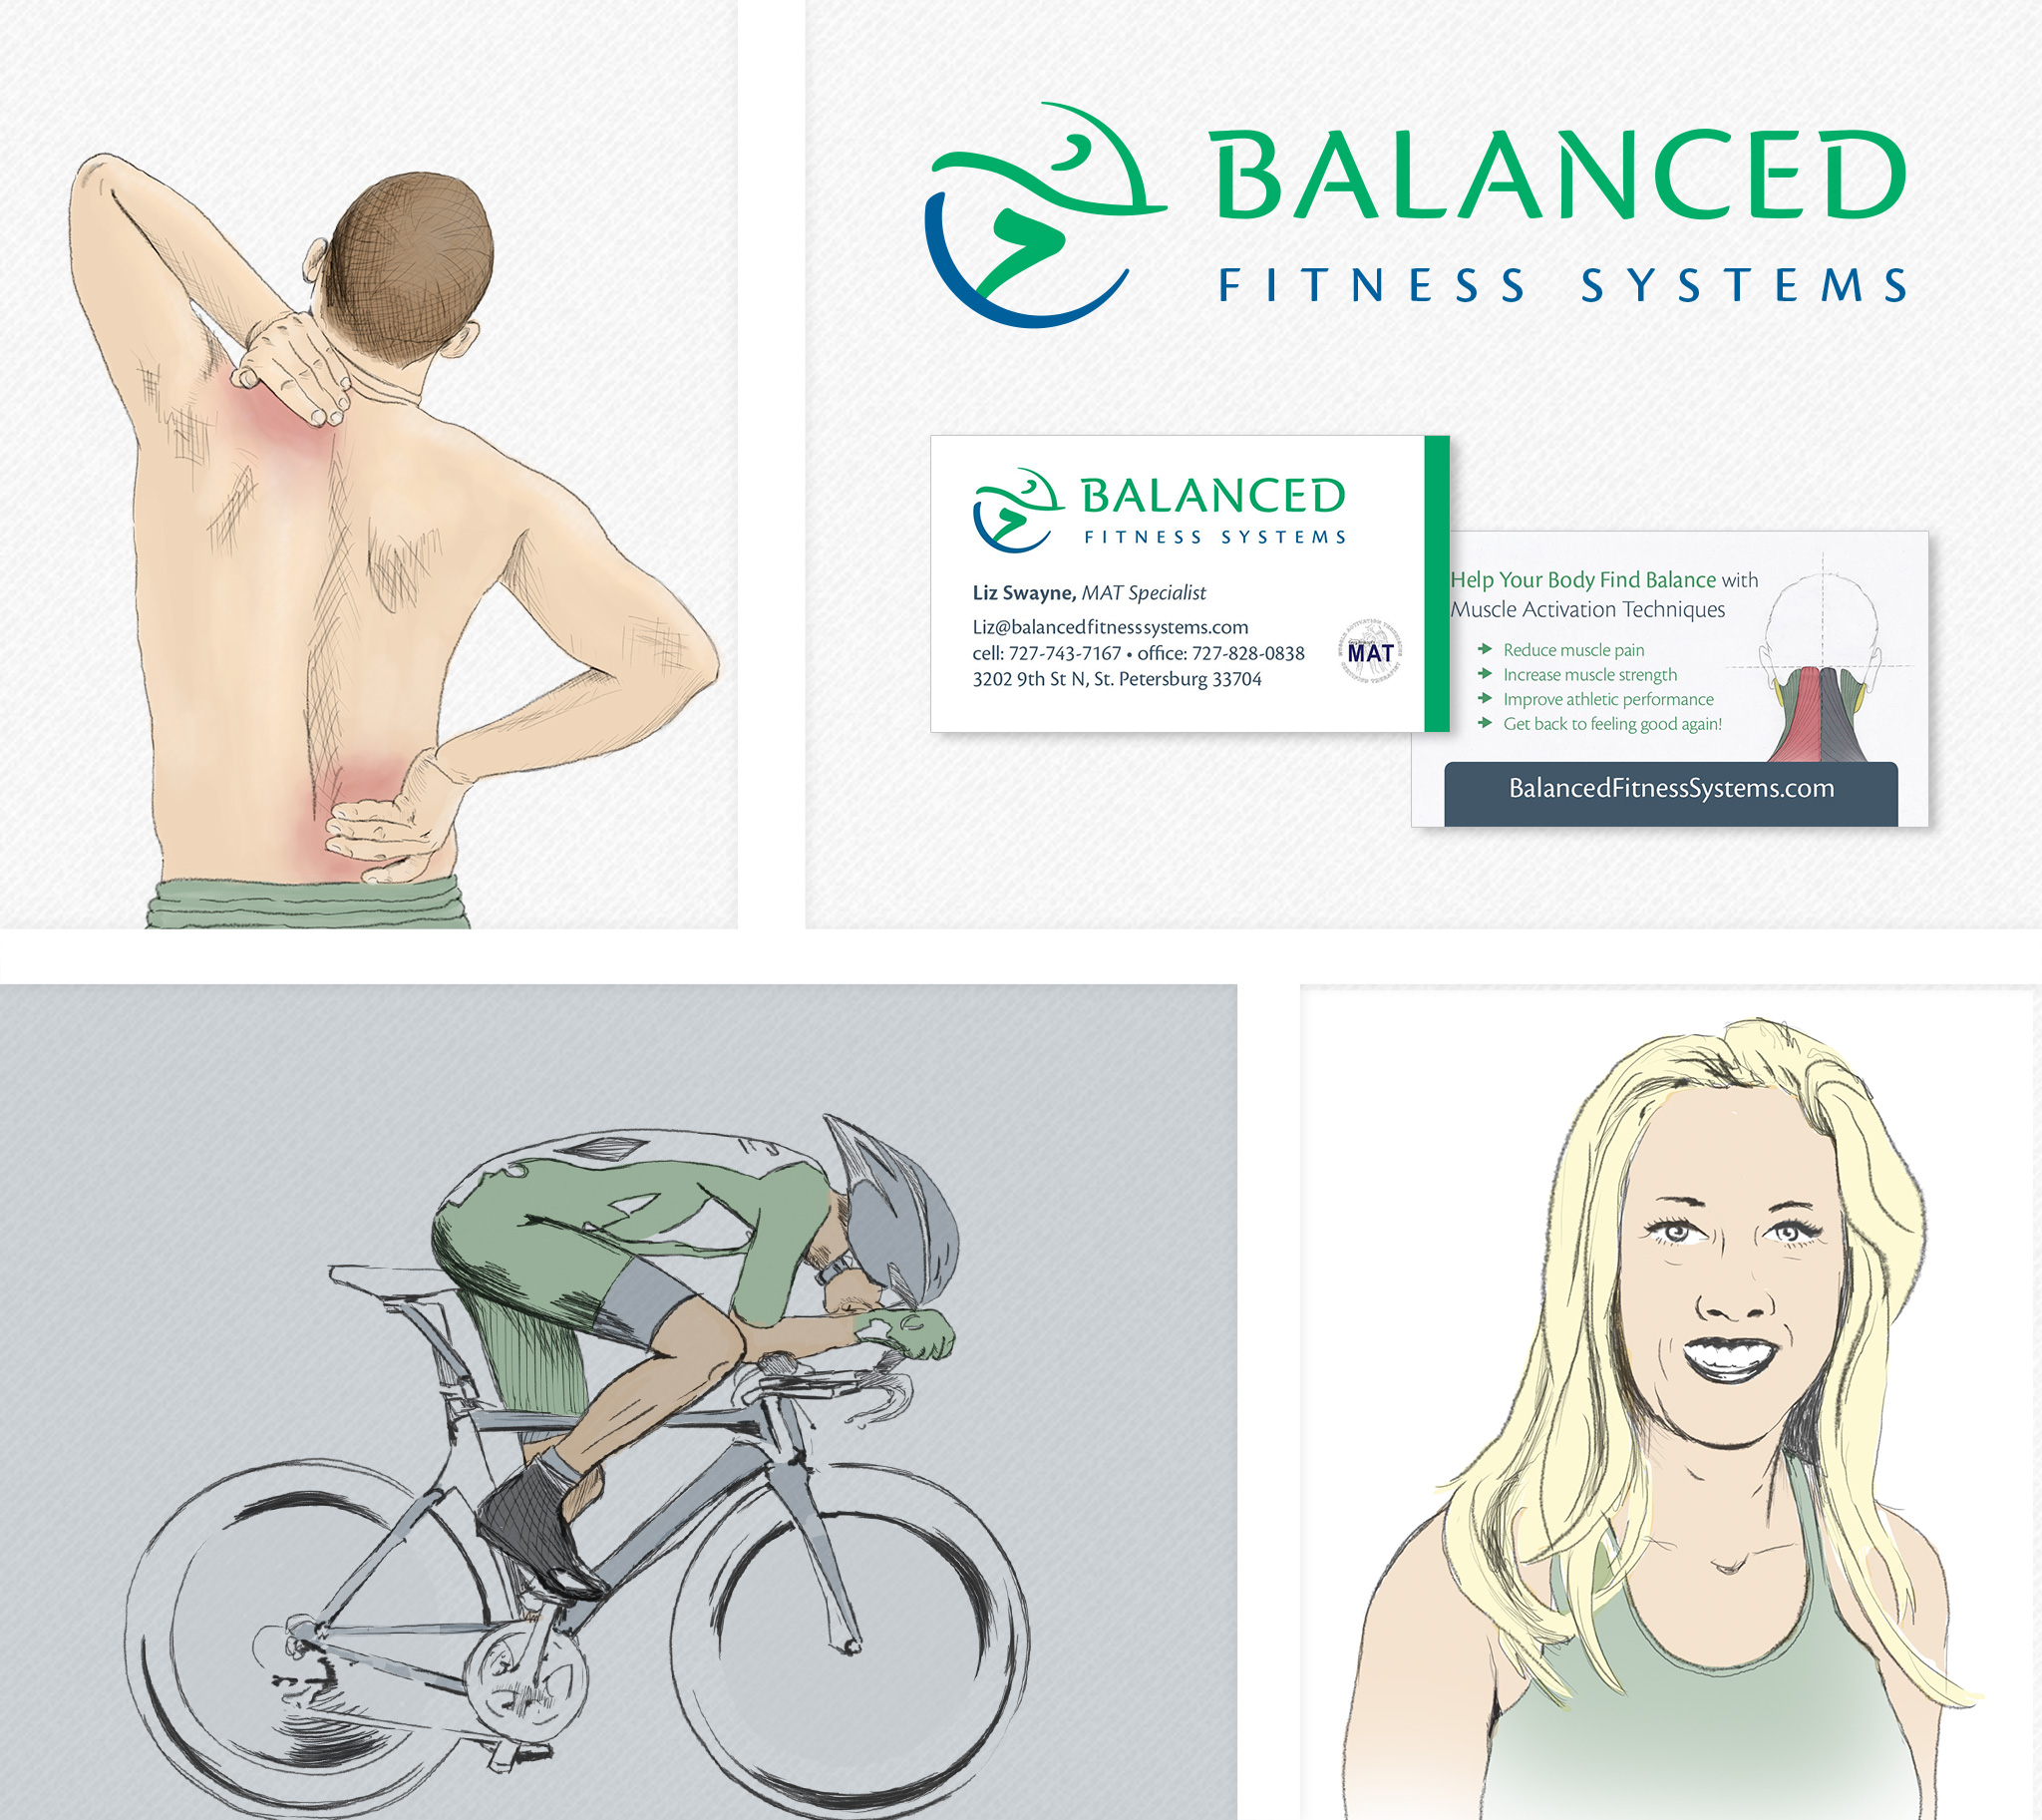 Balanced Fitness Systems Illustration and Branding Showcase